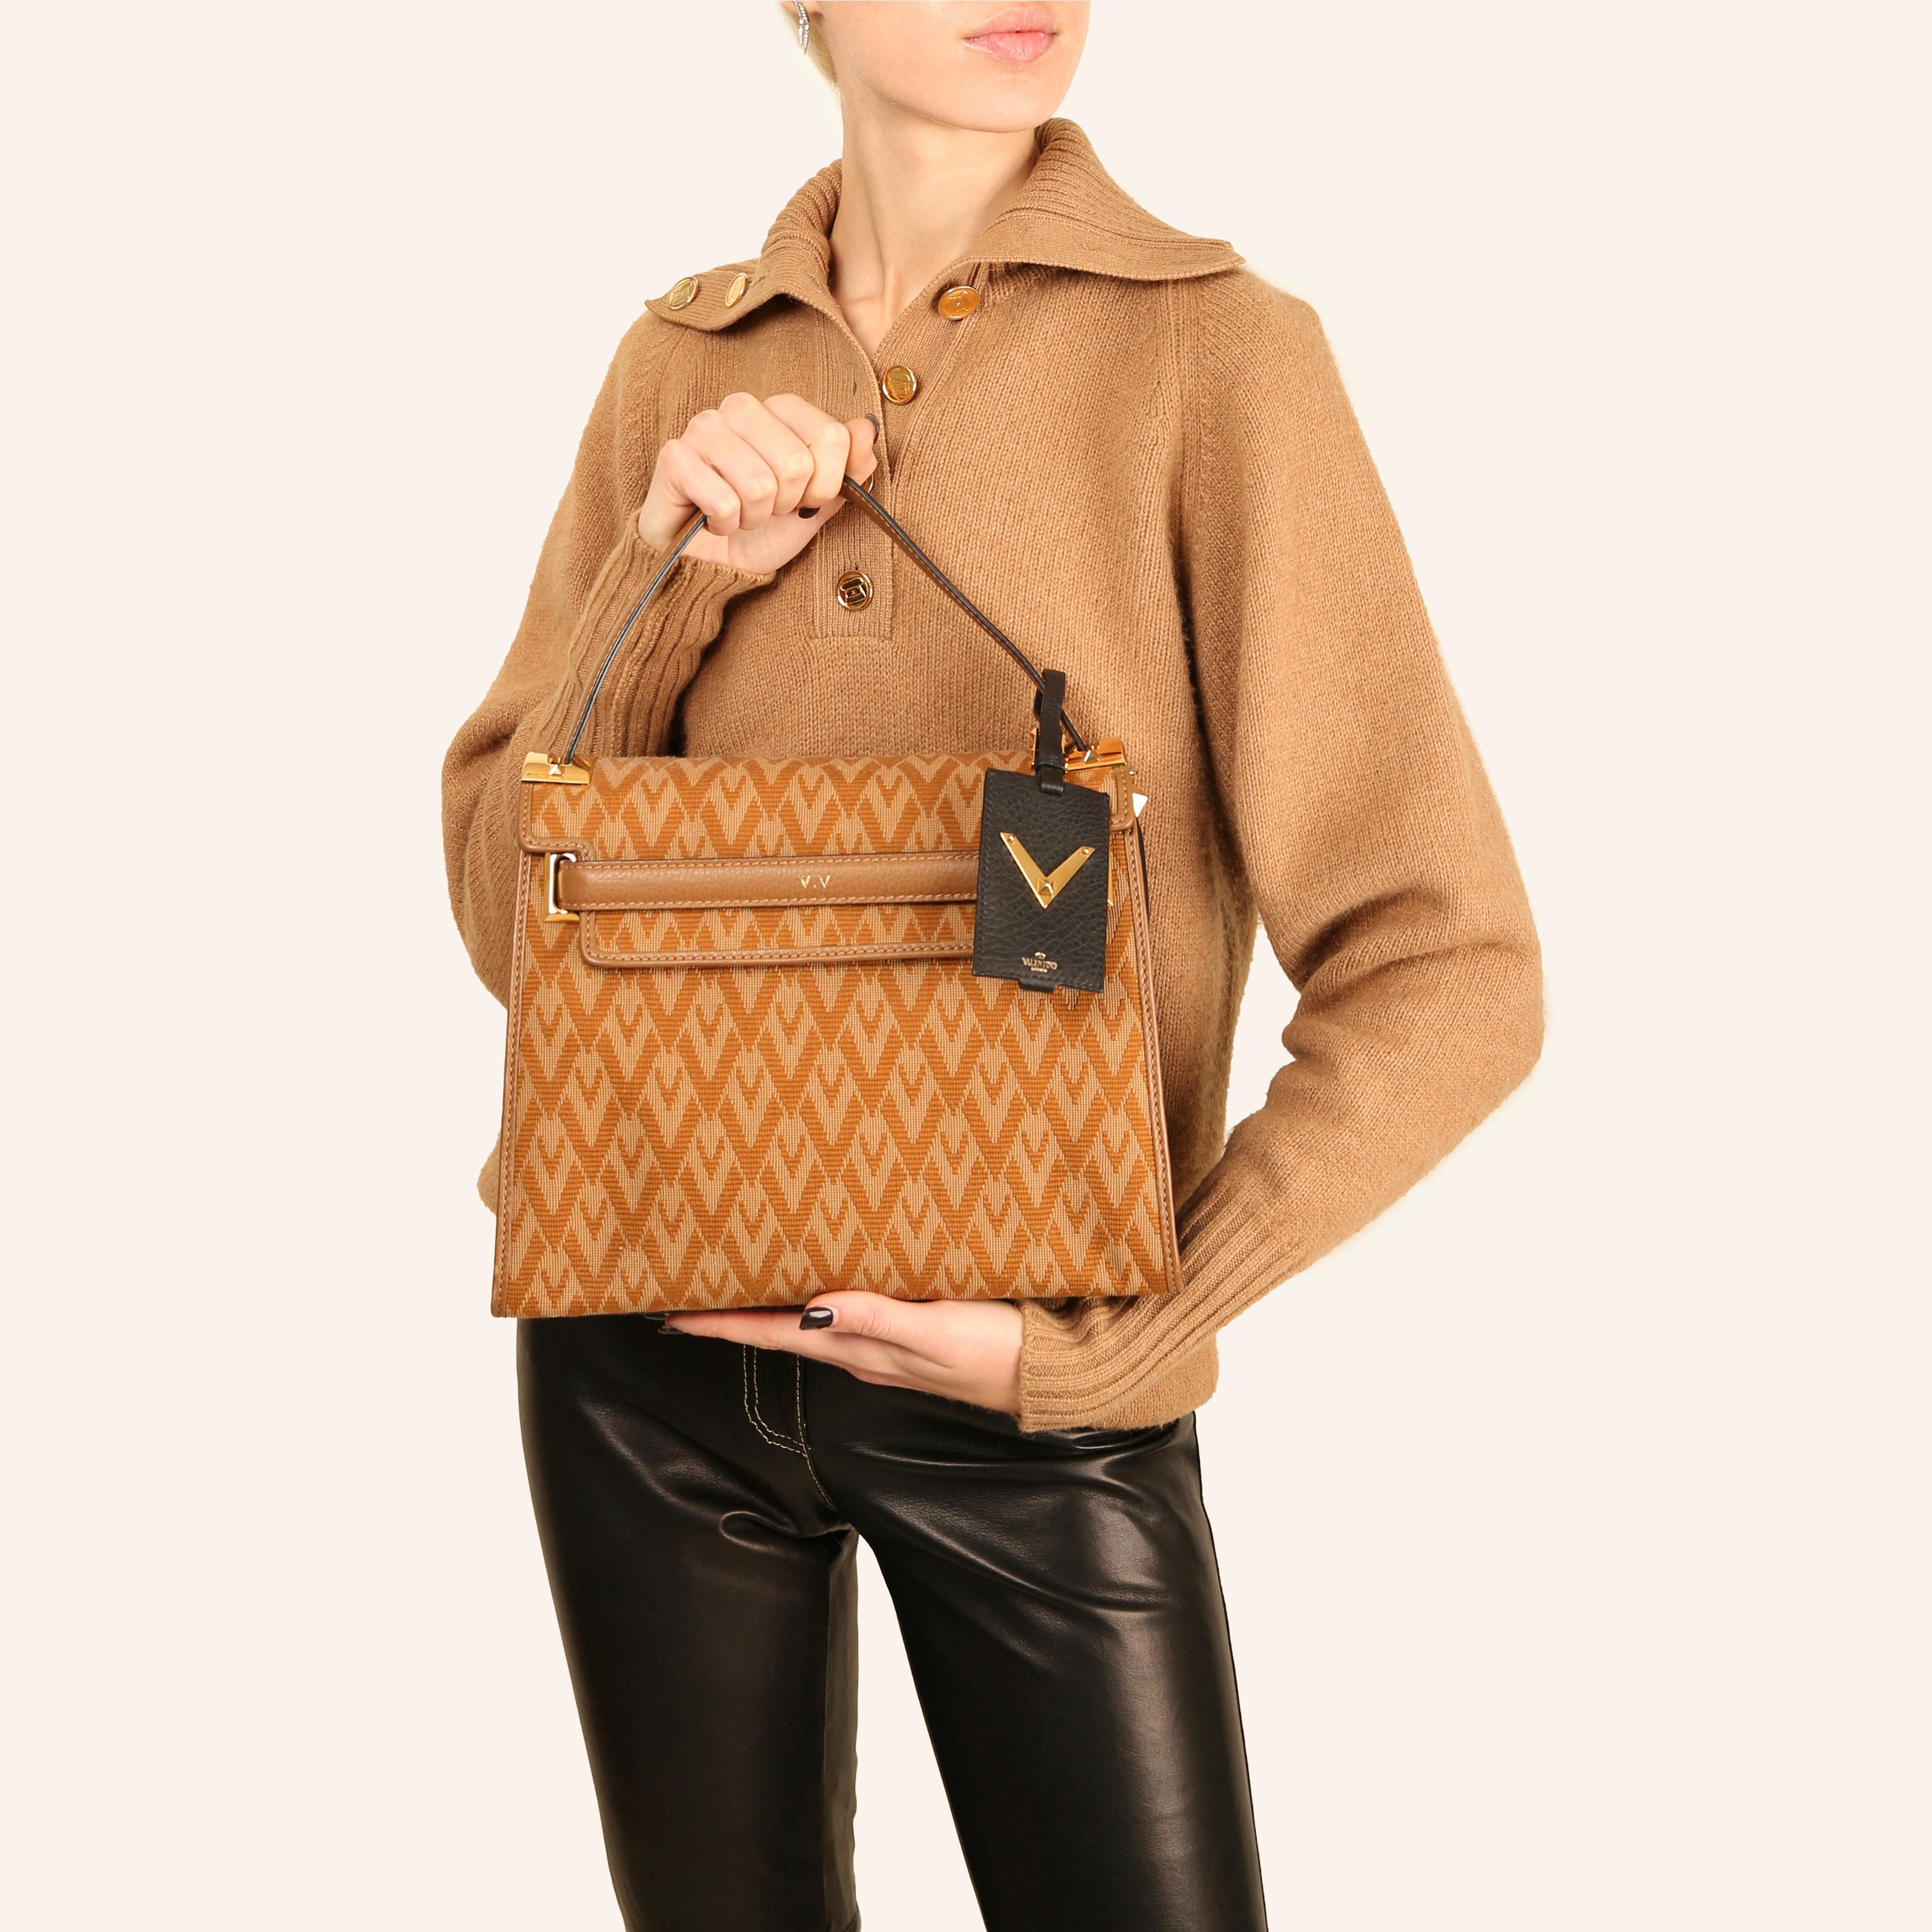 LOVE LALI Vintage

Valentine Garavani trapezoidal style bag crafted in camel fabric that features the V monogram
Finished in camel and black leather with gold stud details and hardware
Front cut out flap
Top handle
Detachable shoulder strap
3 Inner